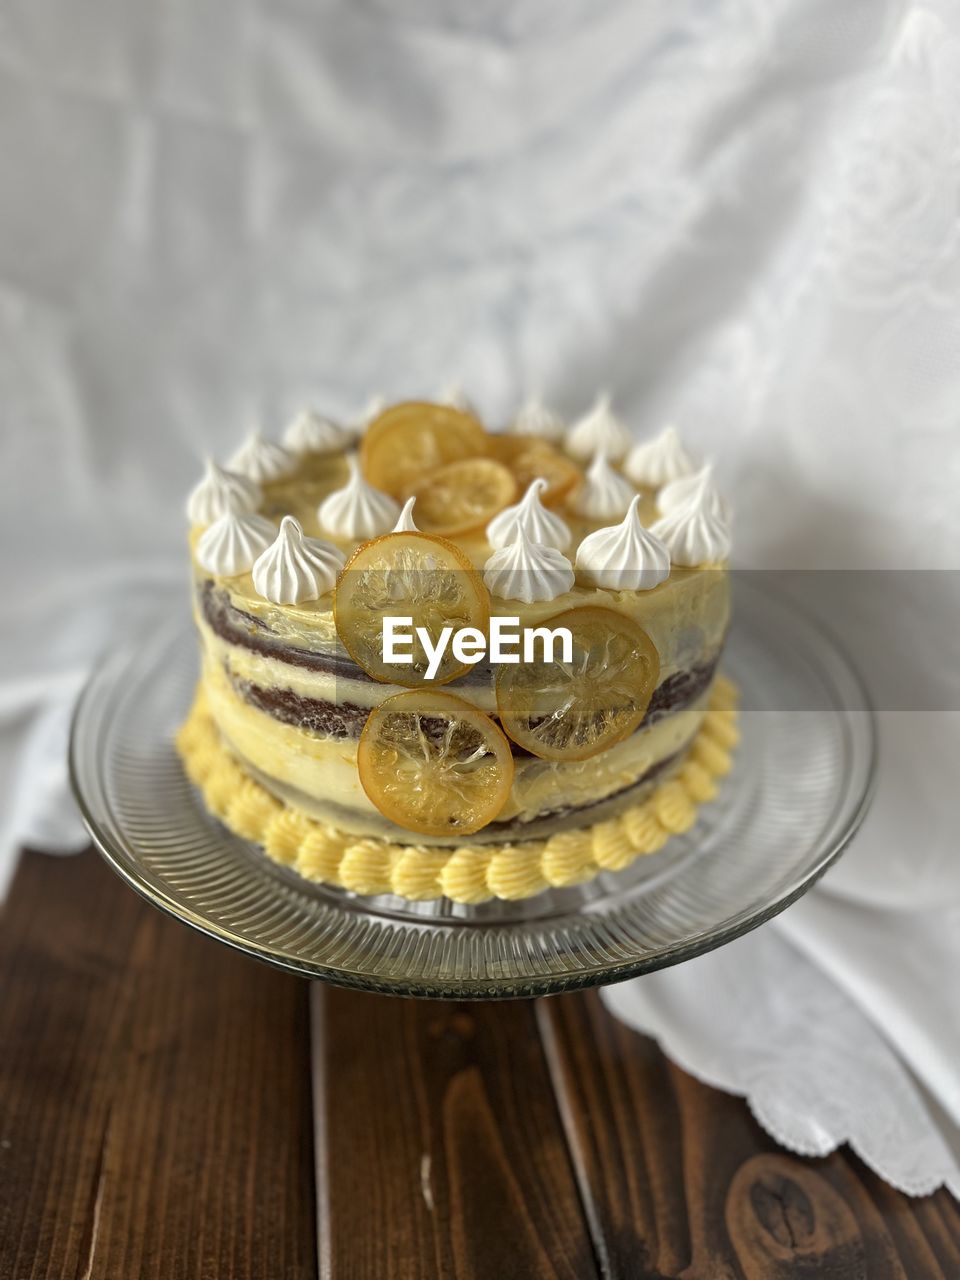 yellow, food and drink, food, icing, birthday cake, wood, cake, fashion accessory, wealth, indoors, no people, sweet food, celebration, gold, sweet, dessert, baked, plate, wedding cake, table, jewellery, wedding, silver, luxury, event, wedding ceremony supply, studio shot, focus on foreground